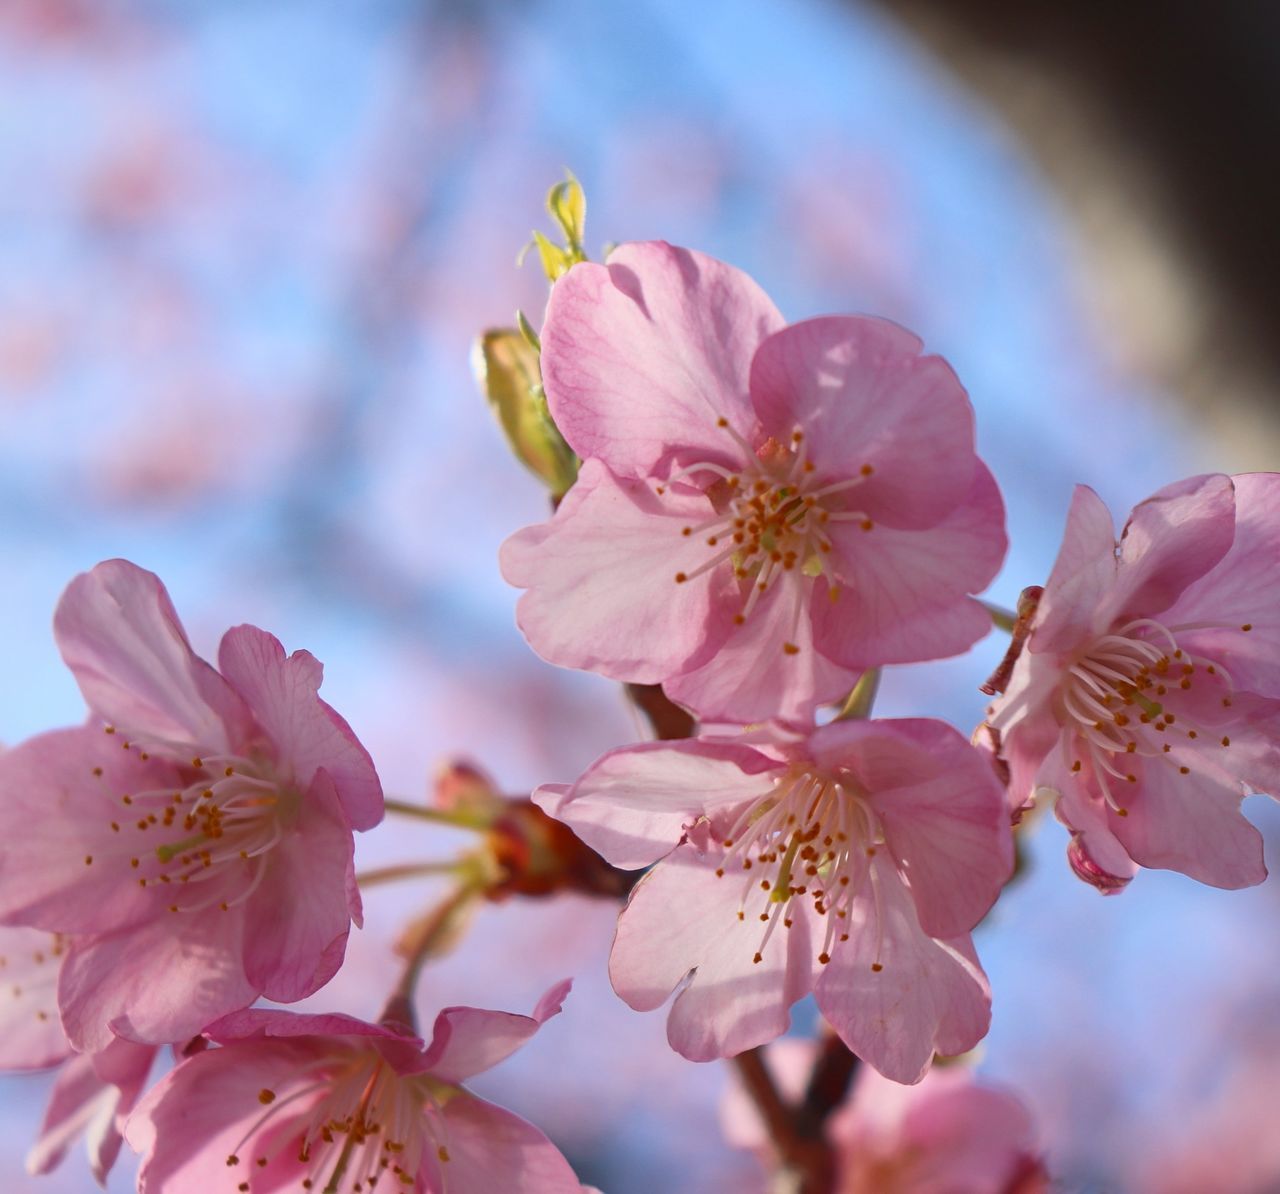 flower, beauty in nature, fragility, blossom, cherry blossom, springtime, petal, growth, pink color, nature, freshness, stamen, flower head, botany, tree, orchard, apple blossom, pollen, no people, close-up, branch, day, selective focus, outdoors, twig, plum blossom, blooming, sky